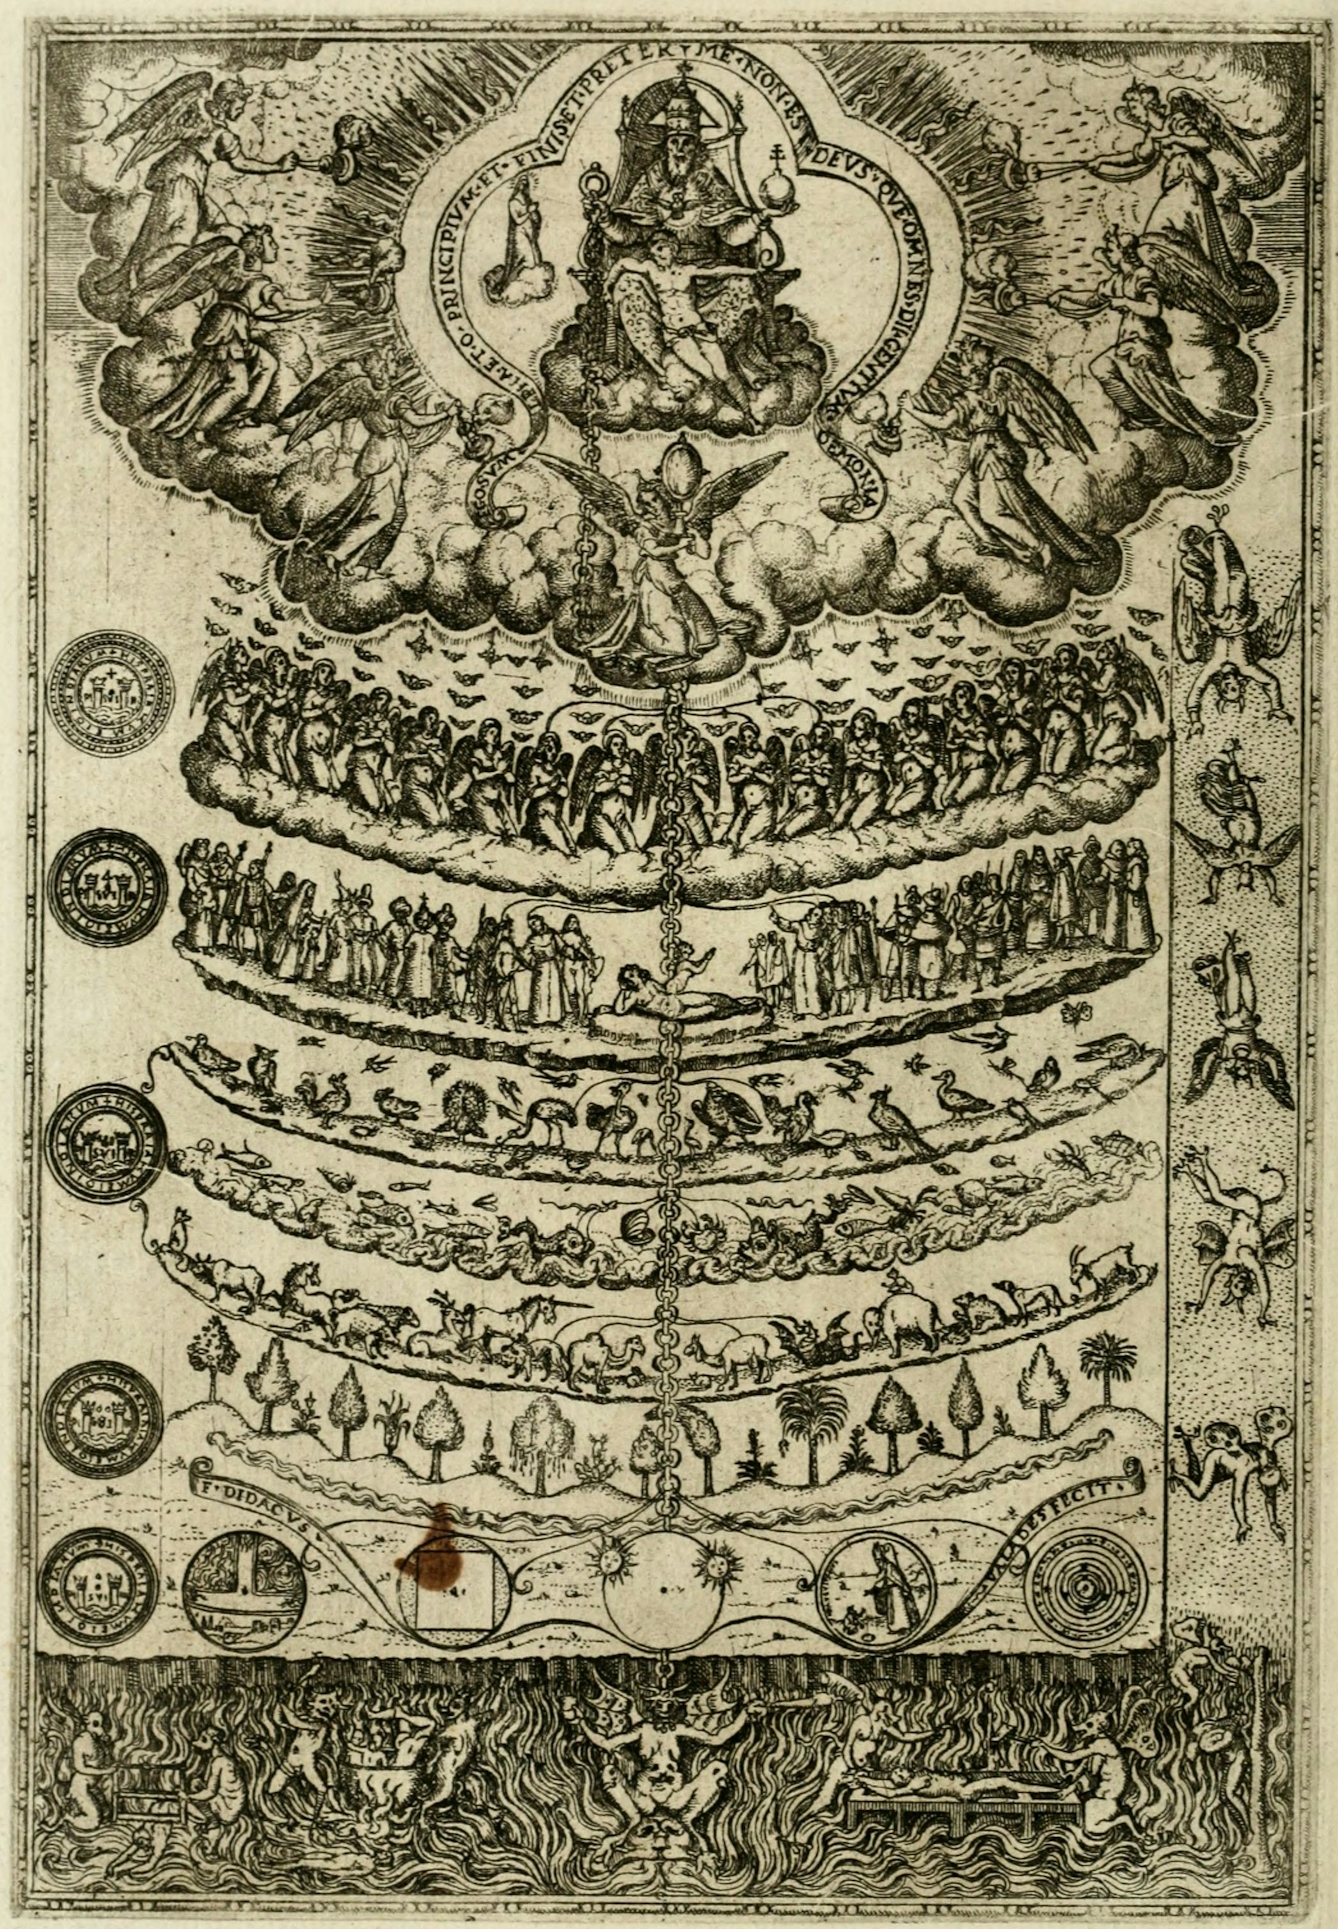 Black and white illustration of a great chain of being, depicting a chain rising up through the centre of the image with things ranked hierarchically with hell and devils below and then from trees and plants through animals up to humans, angels and god at the top. 